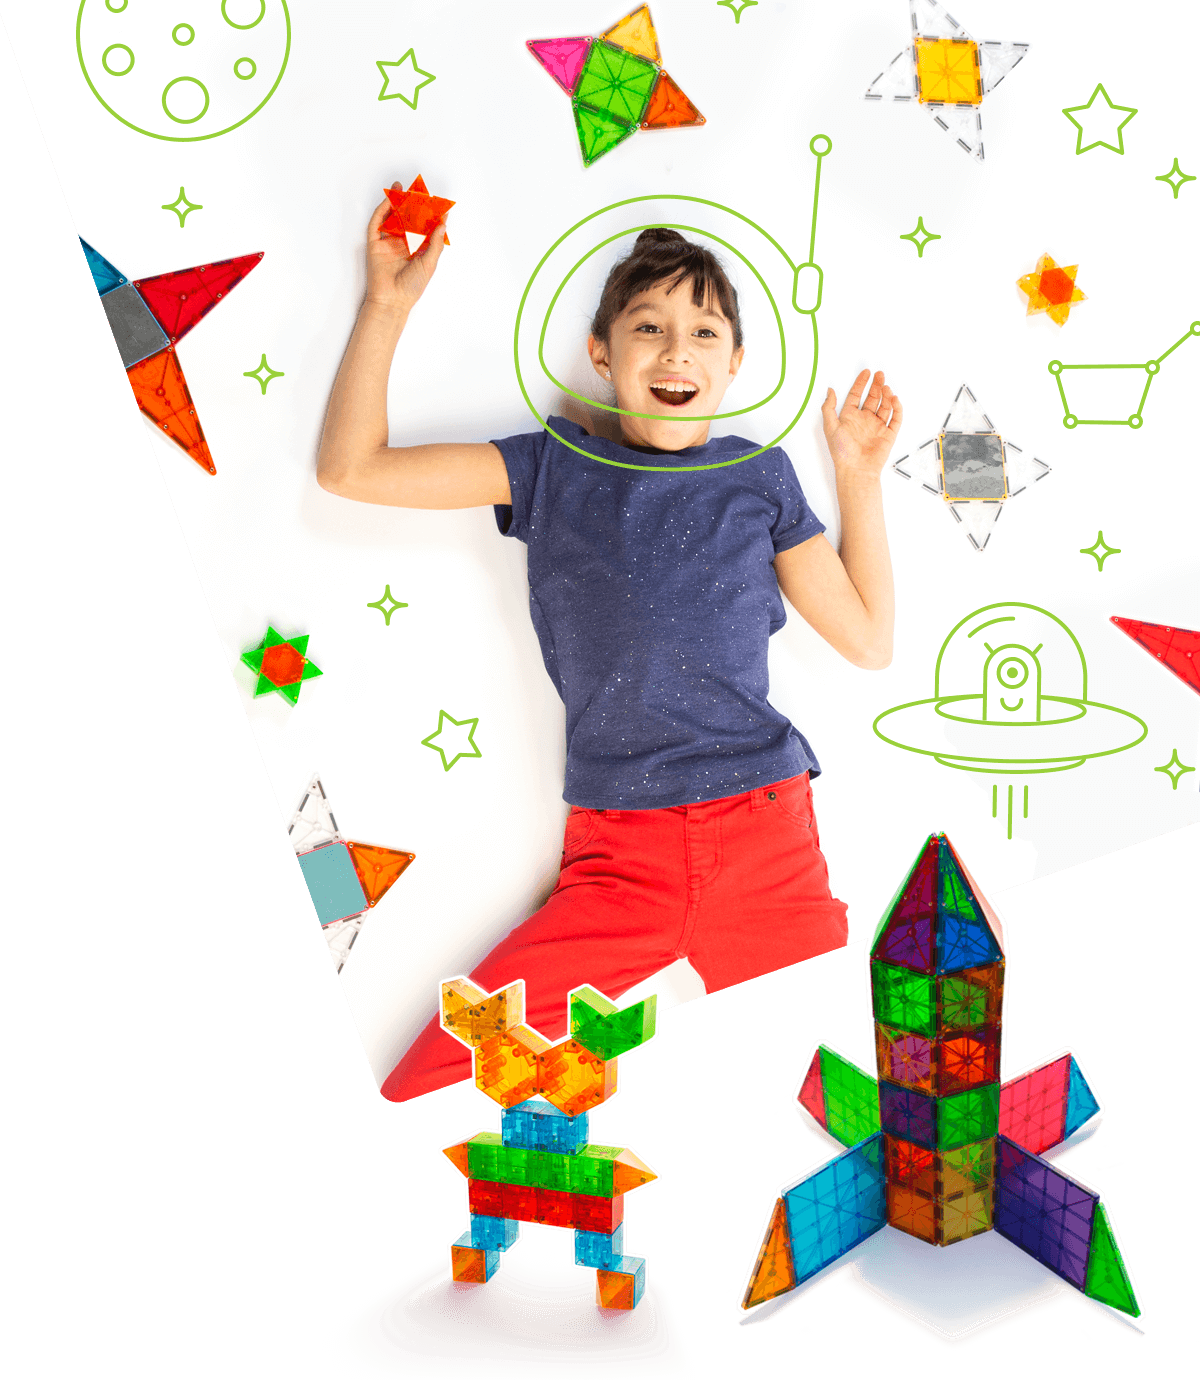 Magnetic Blocks to Fuse Math, Science & Creativity - Magna-Tiles®